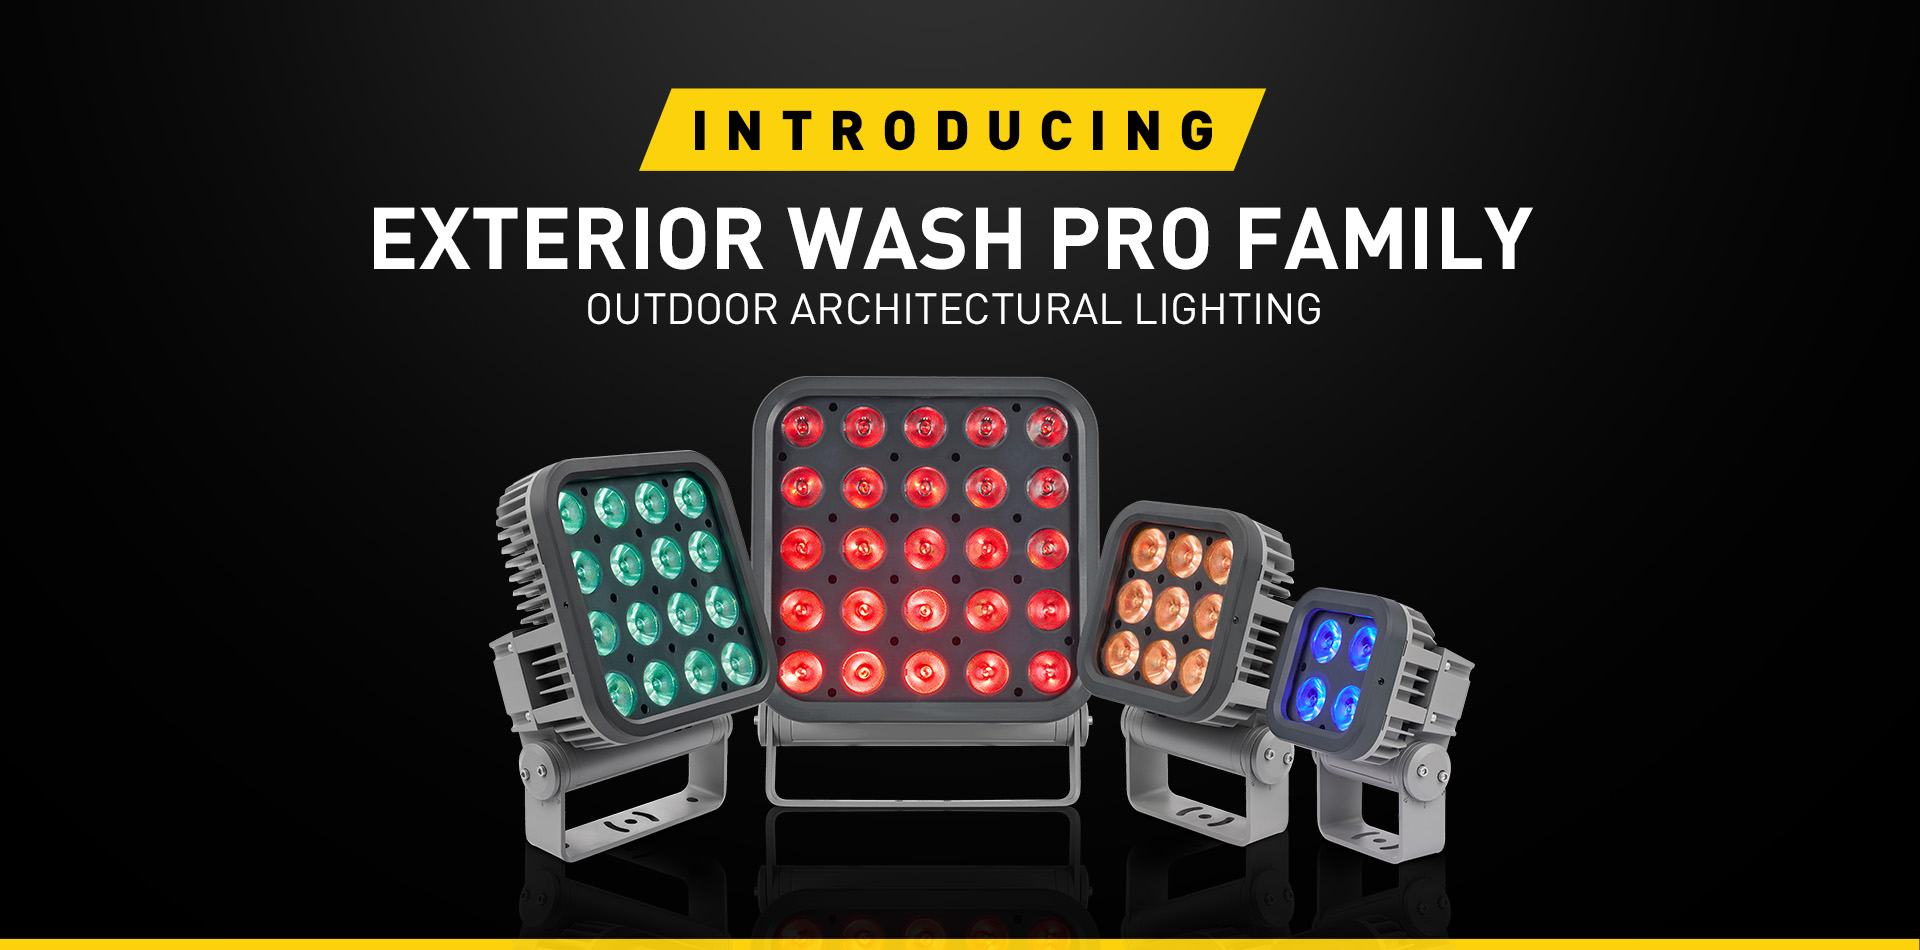 Martin Professional Introduces Versatile Exterior Wash Pro Family: Creativity Uncompromised by Harsh Conditions